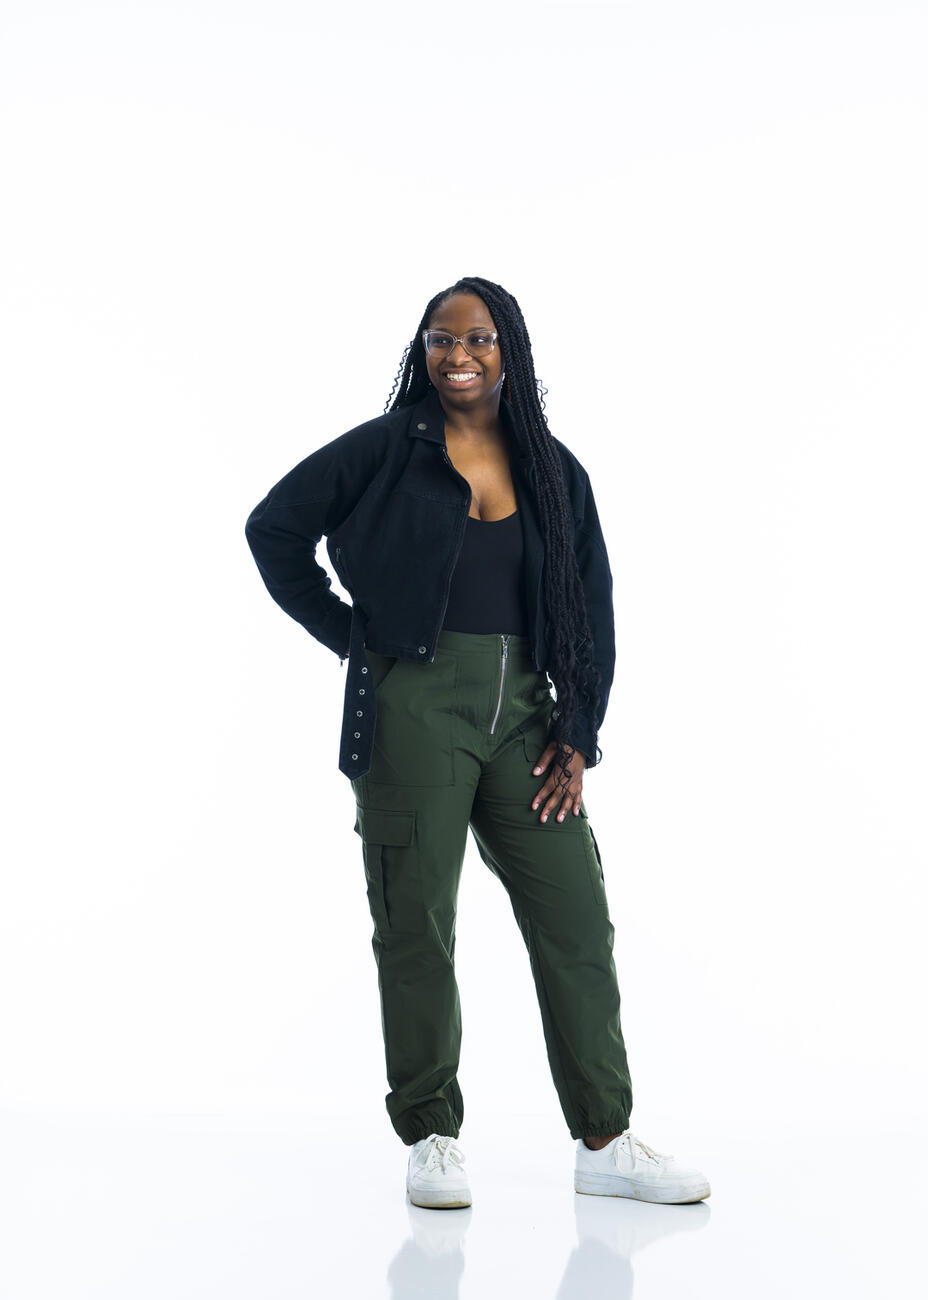 A student stands with one hand on her hip in front of a white background.